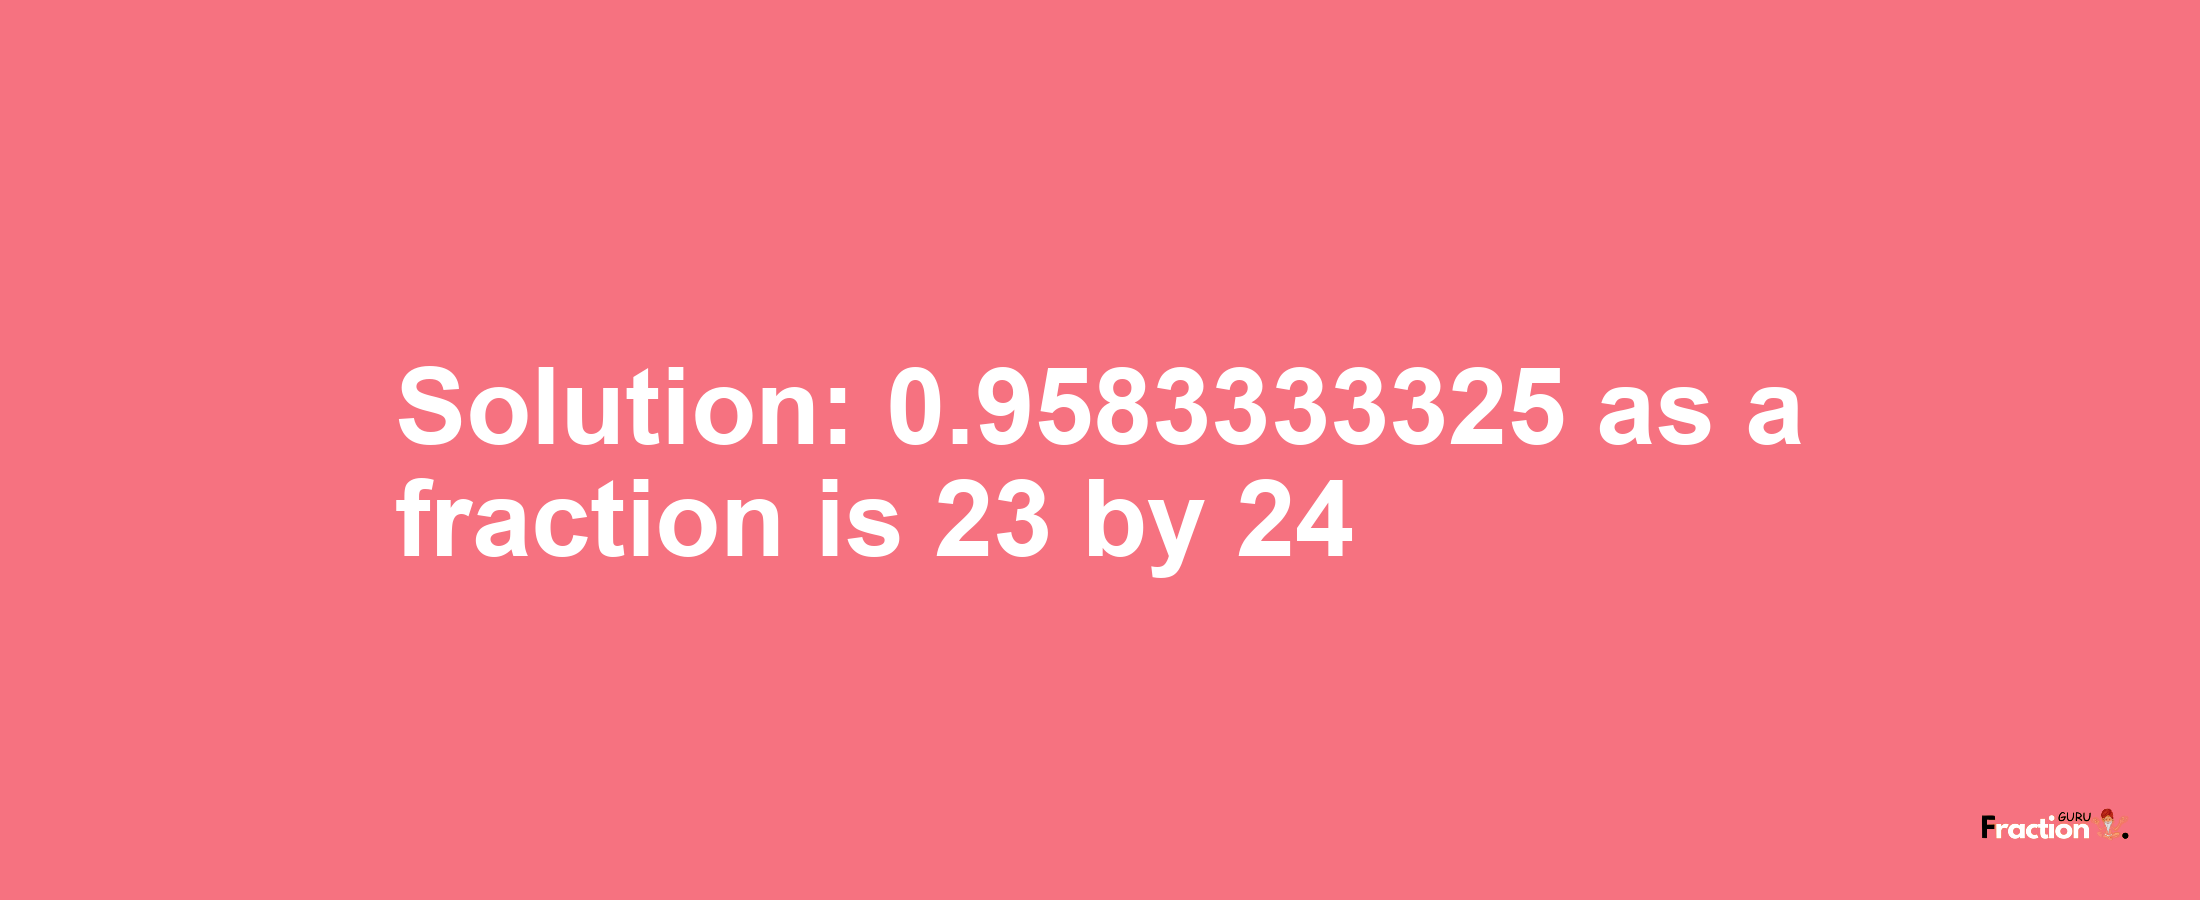 Solution:0.9583333325 as a fraction is 23/24